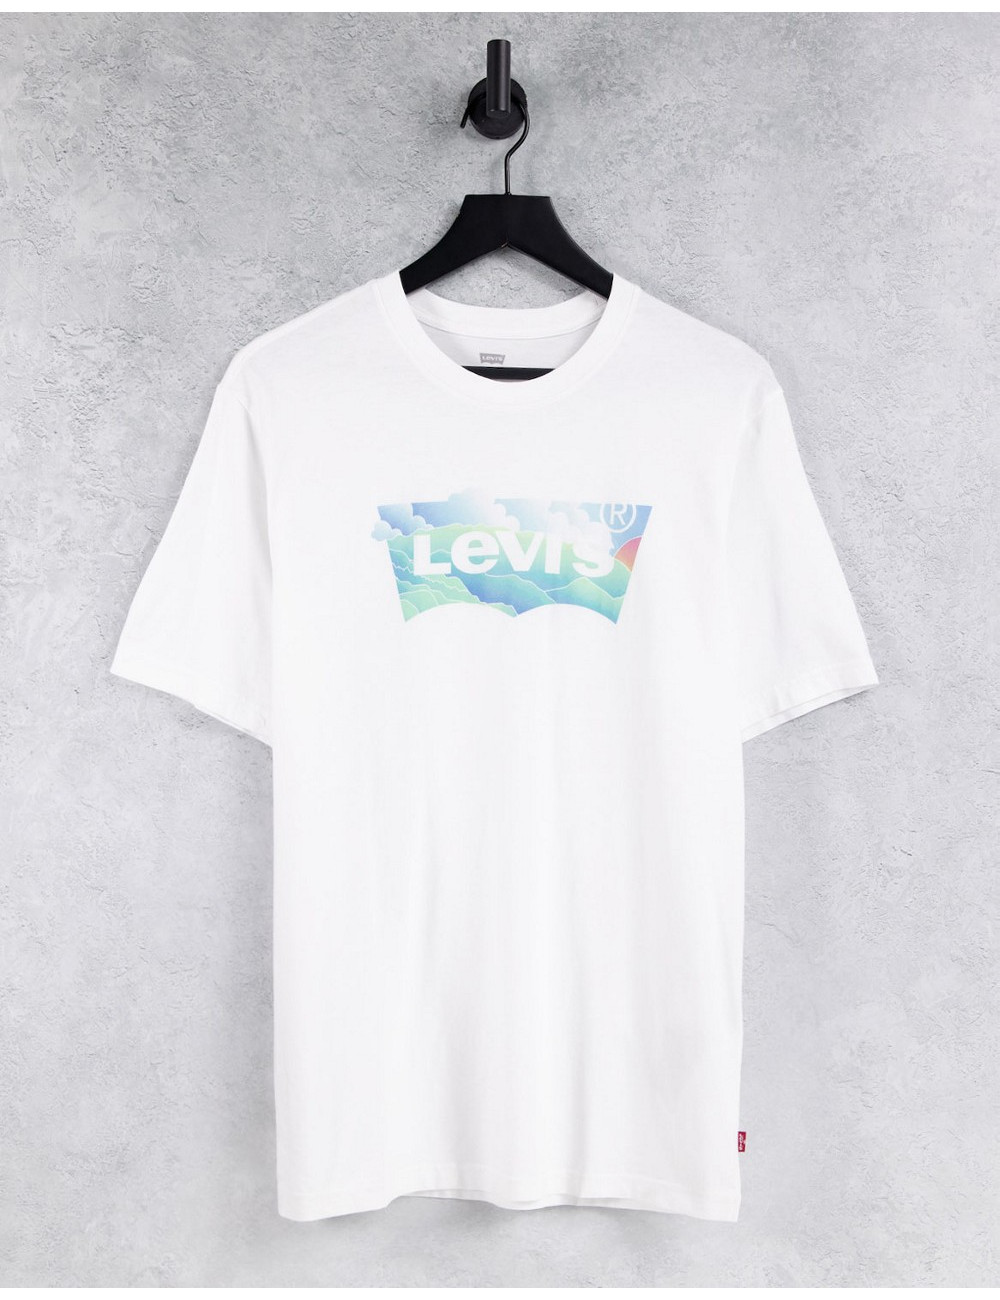 Levi's t-shirt in green...